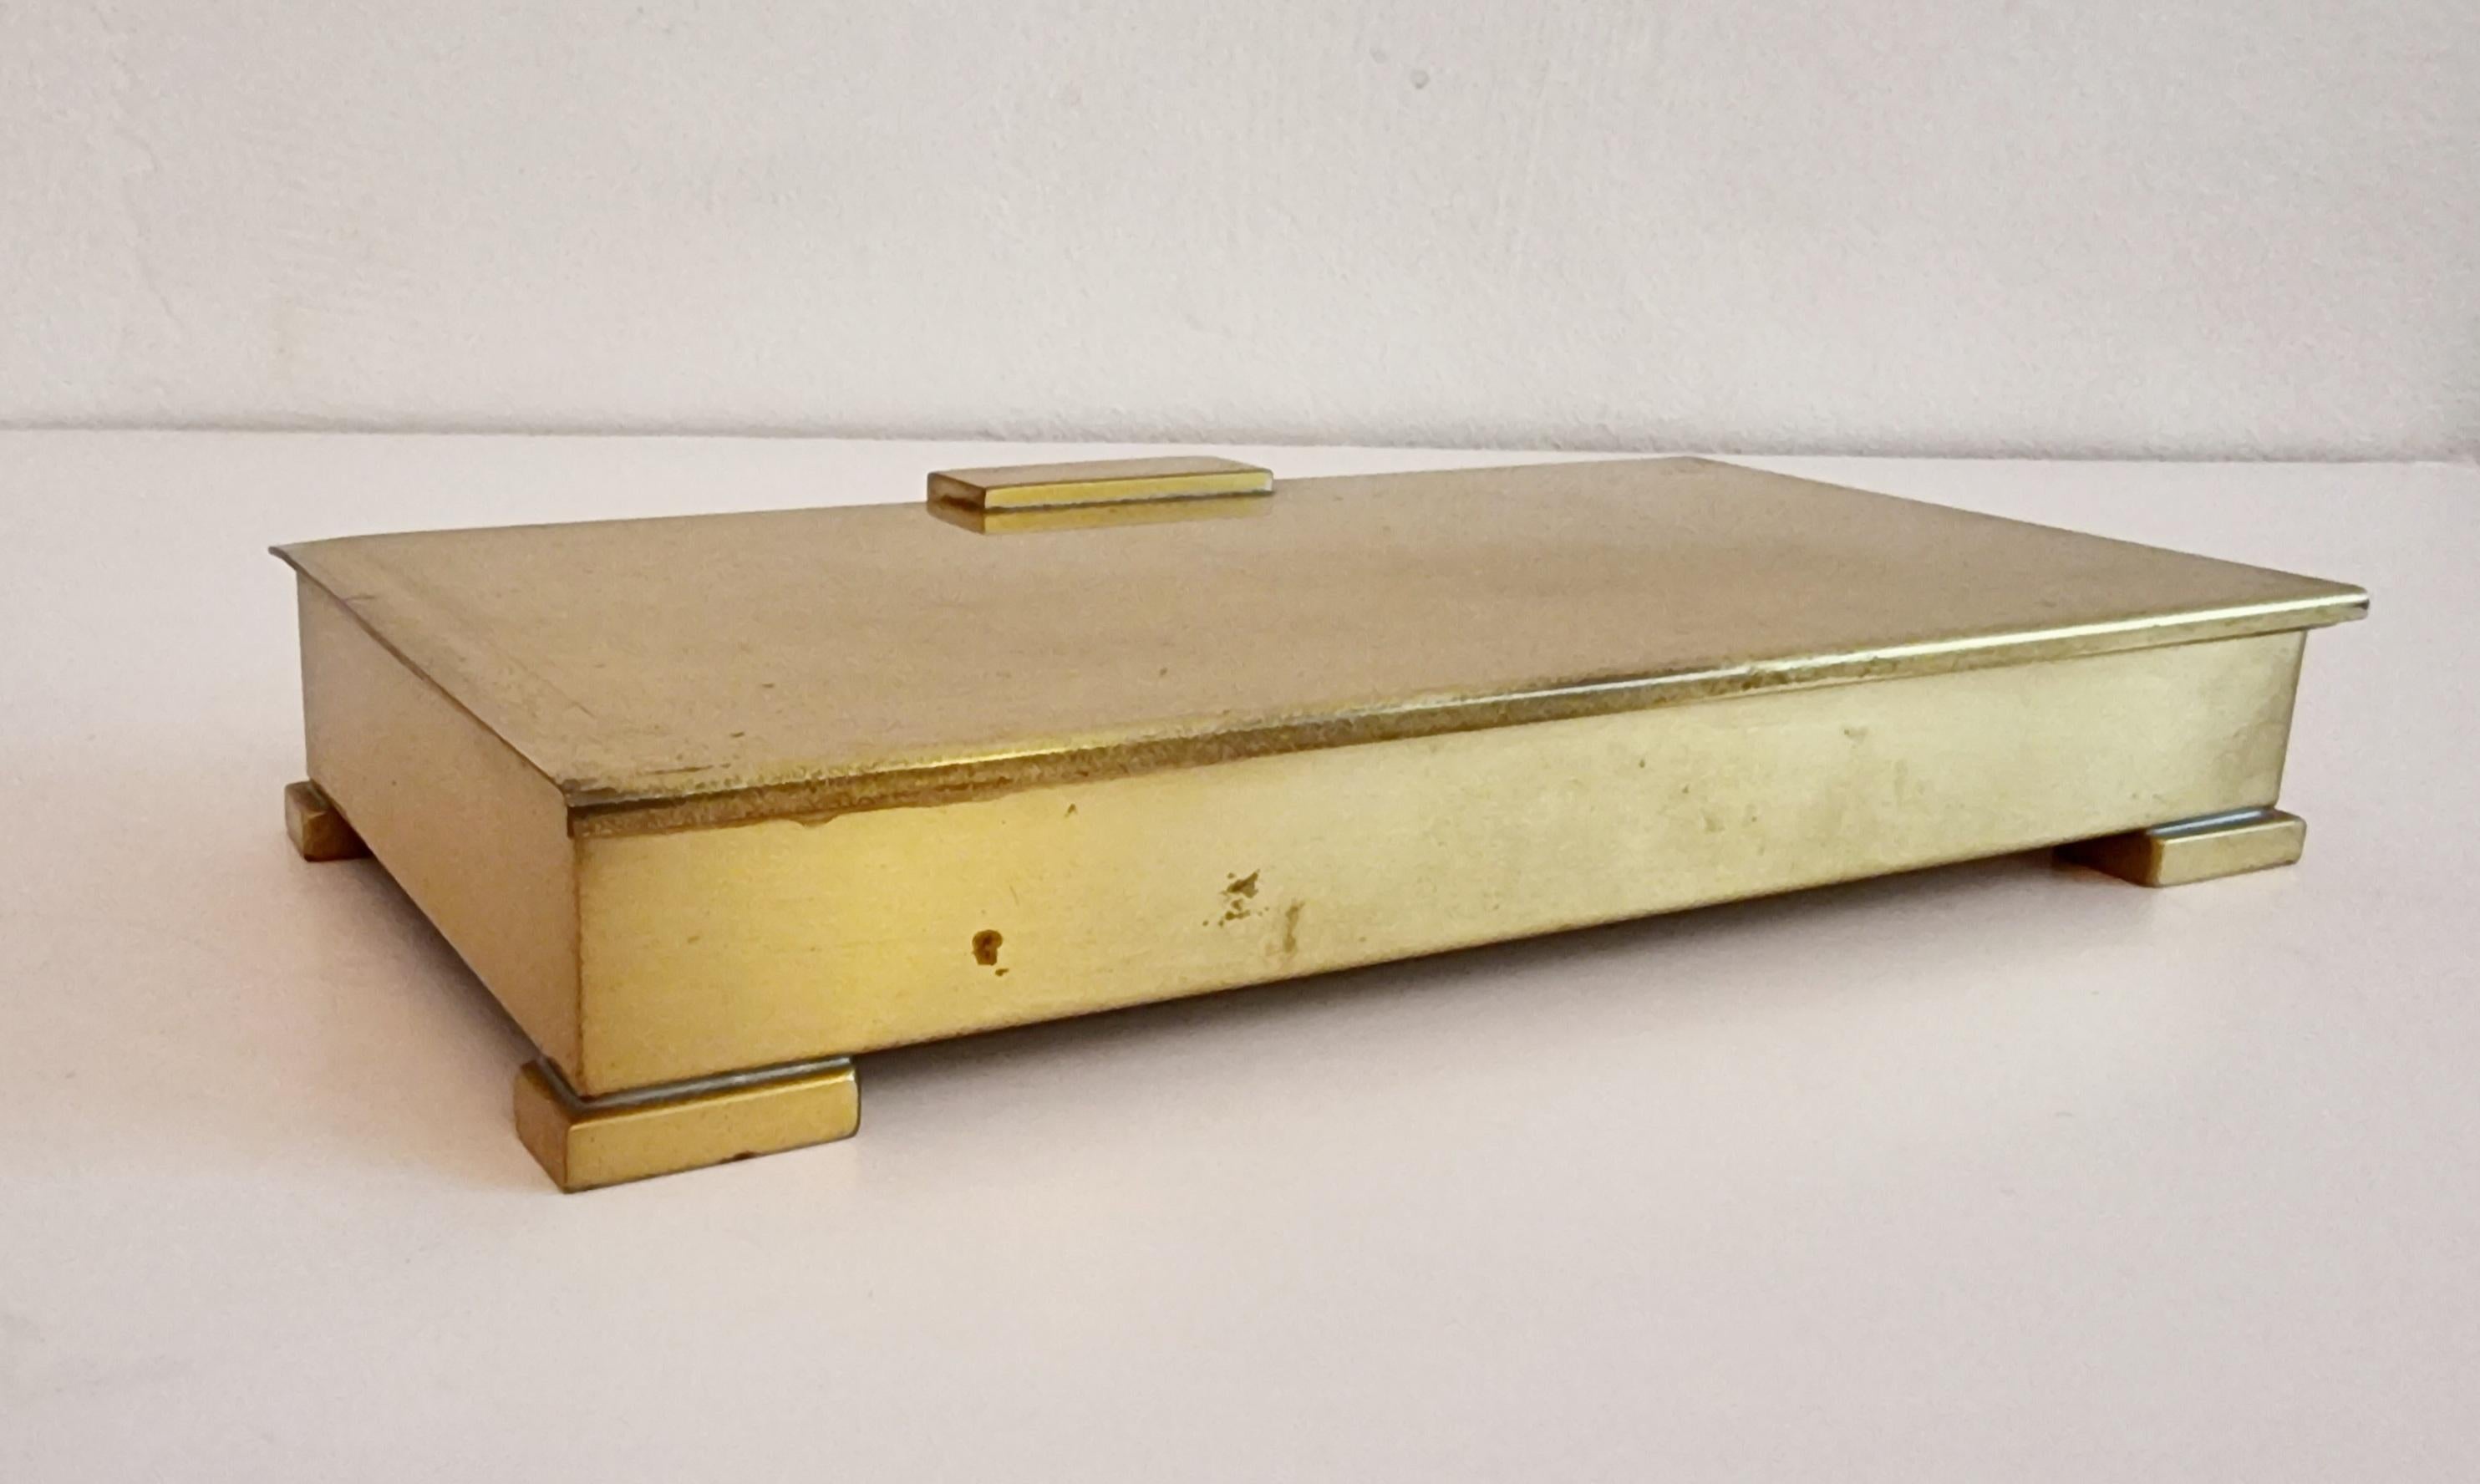 Tobacco/Decorative Box, Scandinavian Modern, Perfect for a Personal Engravering 2